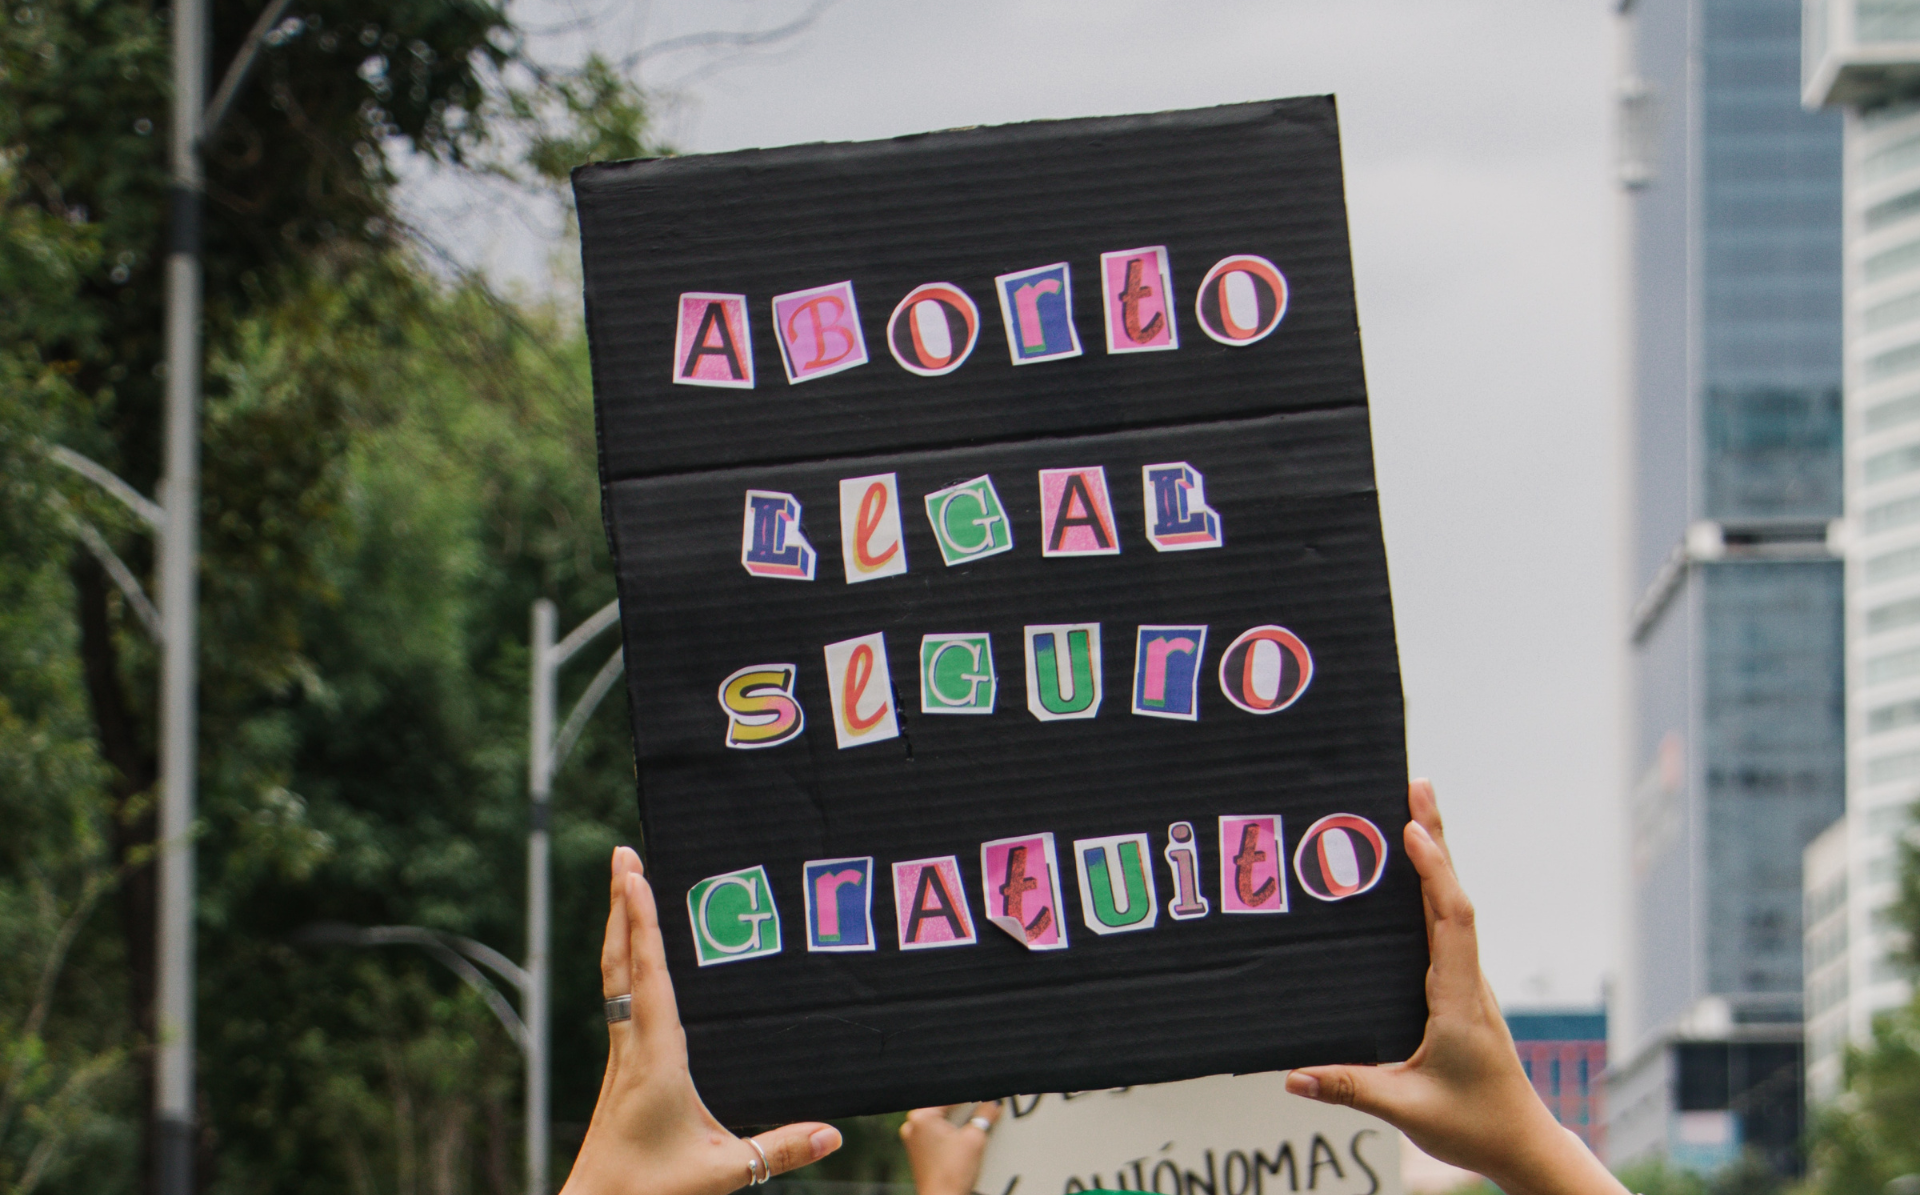 Woman holding sign in Spansih at reproductive rights protest which says, "Aborto legal, segura, gratuito," translating in English to "Safe, free, and legal abortion." Rallies in Latin America have been influenced by the historic 1979 Roe v. Wade ruling.